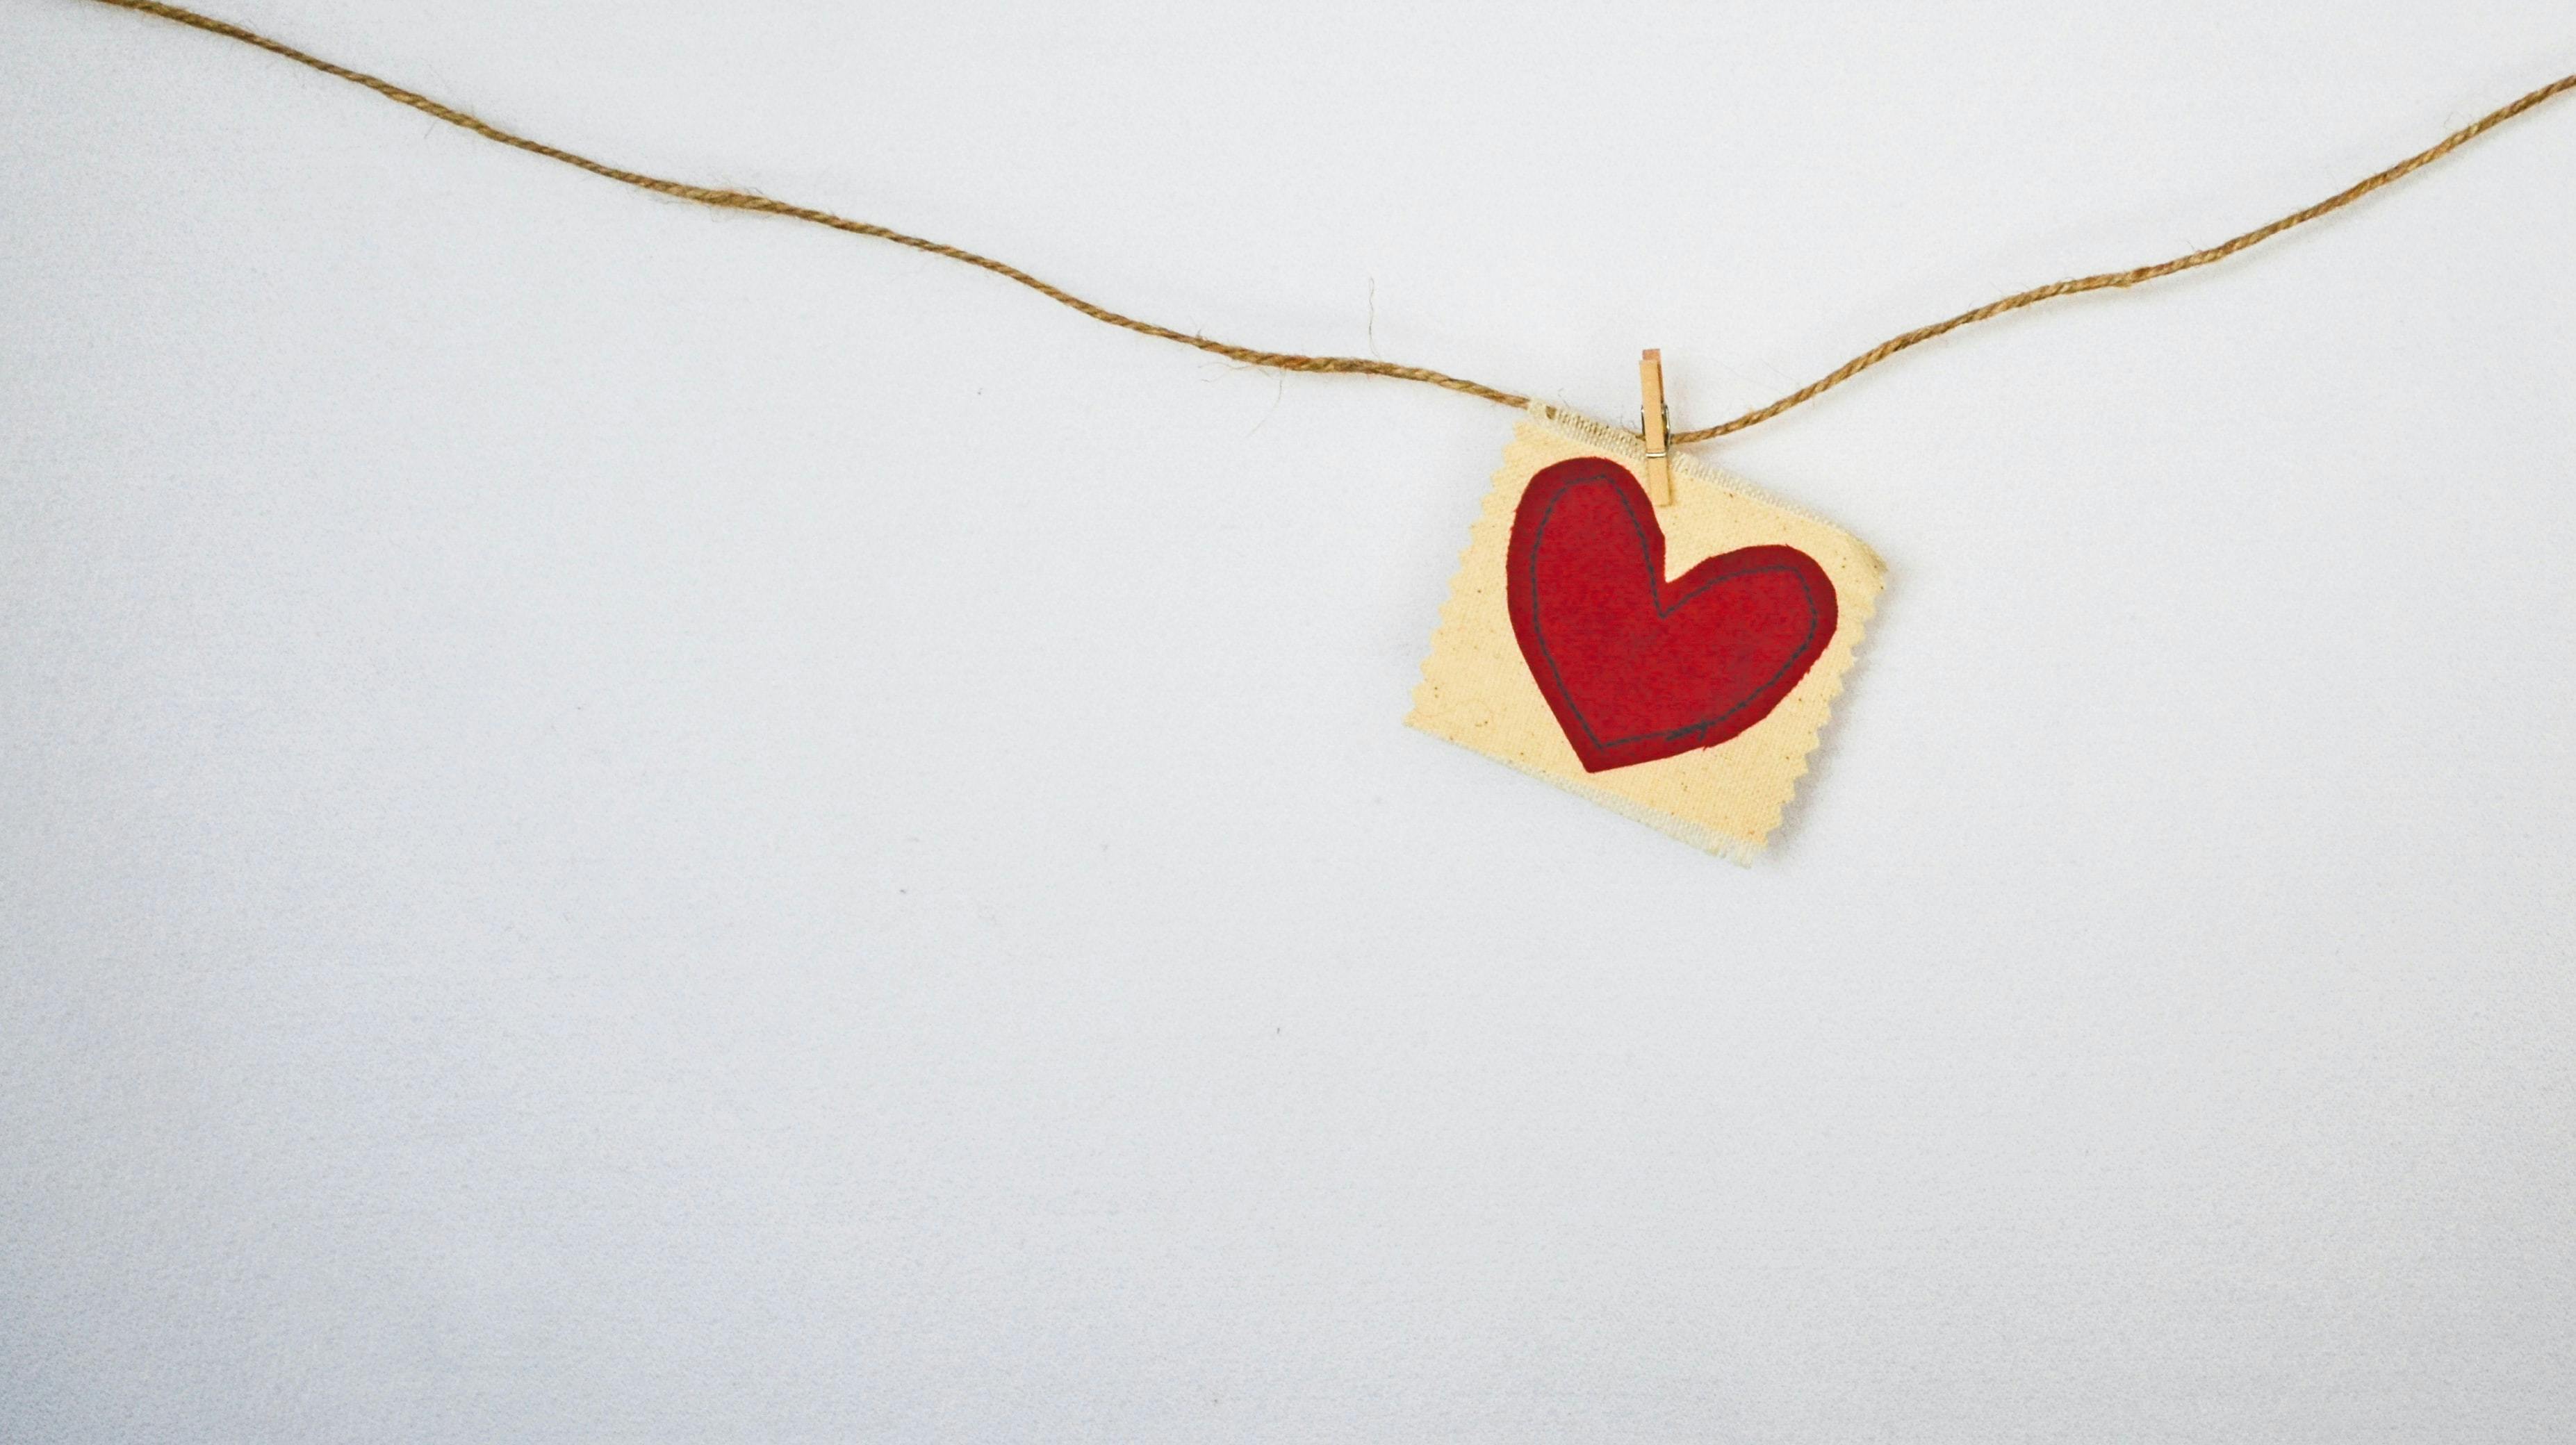 Red fabric heart on piece of string, white background